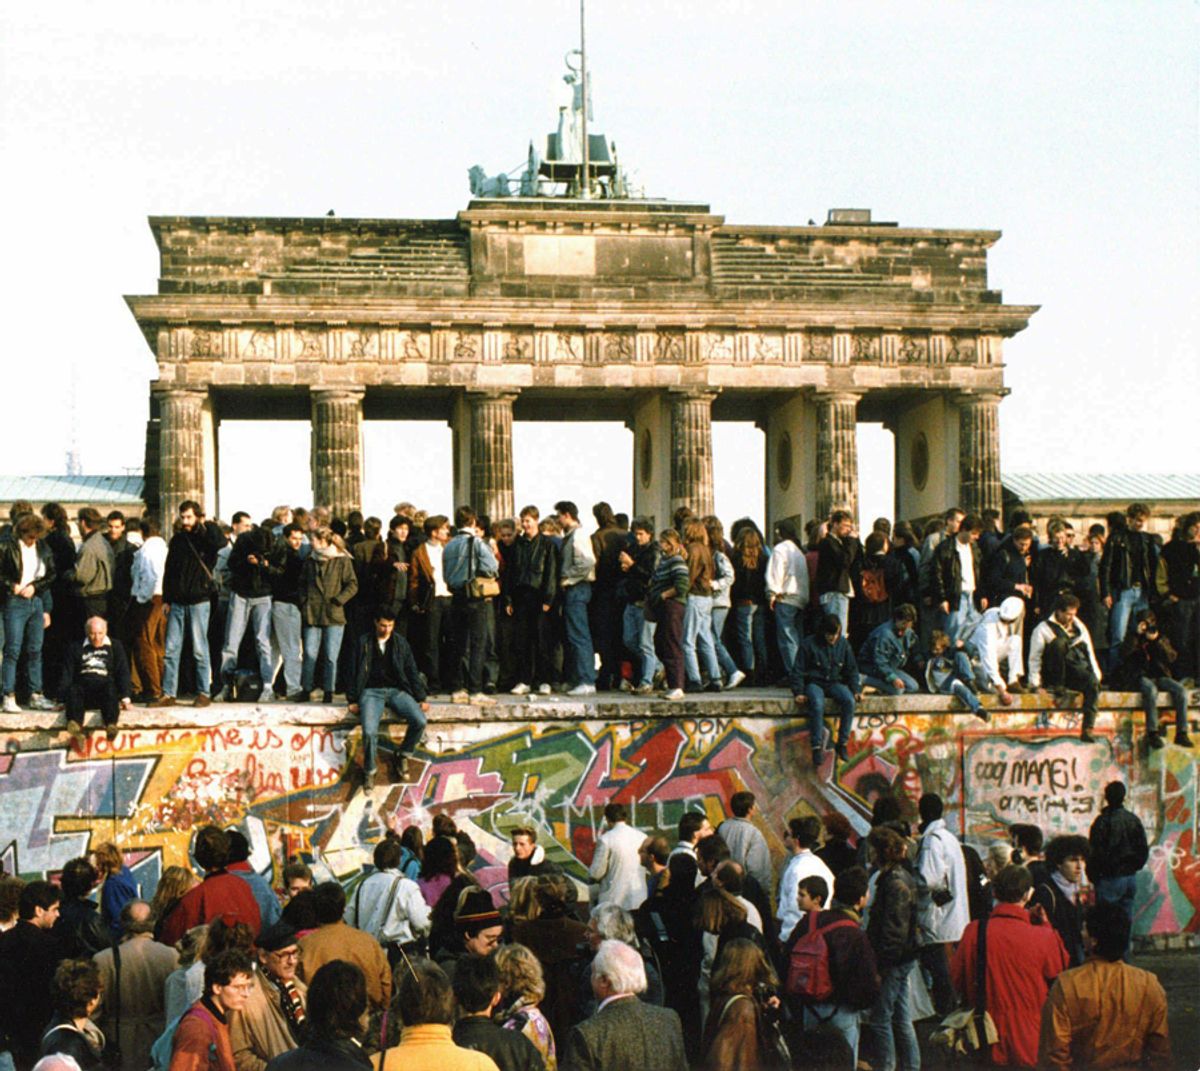 The Brandenburg Gate on Nov. 10, 1989, one day after the wall opened.